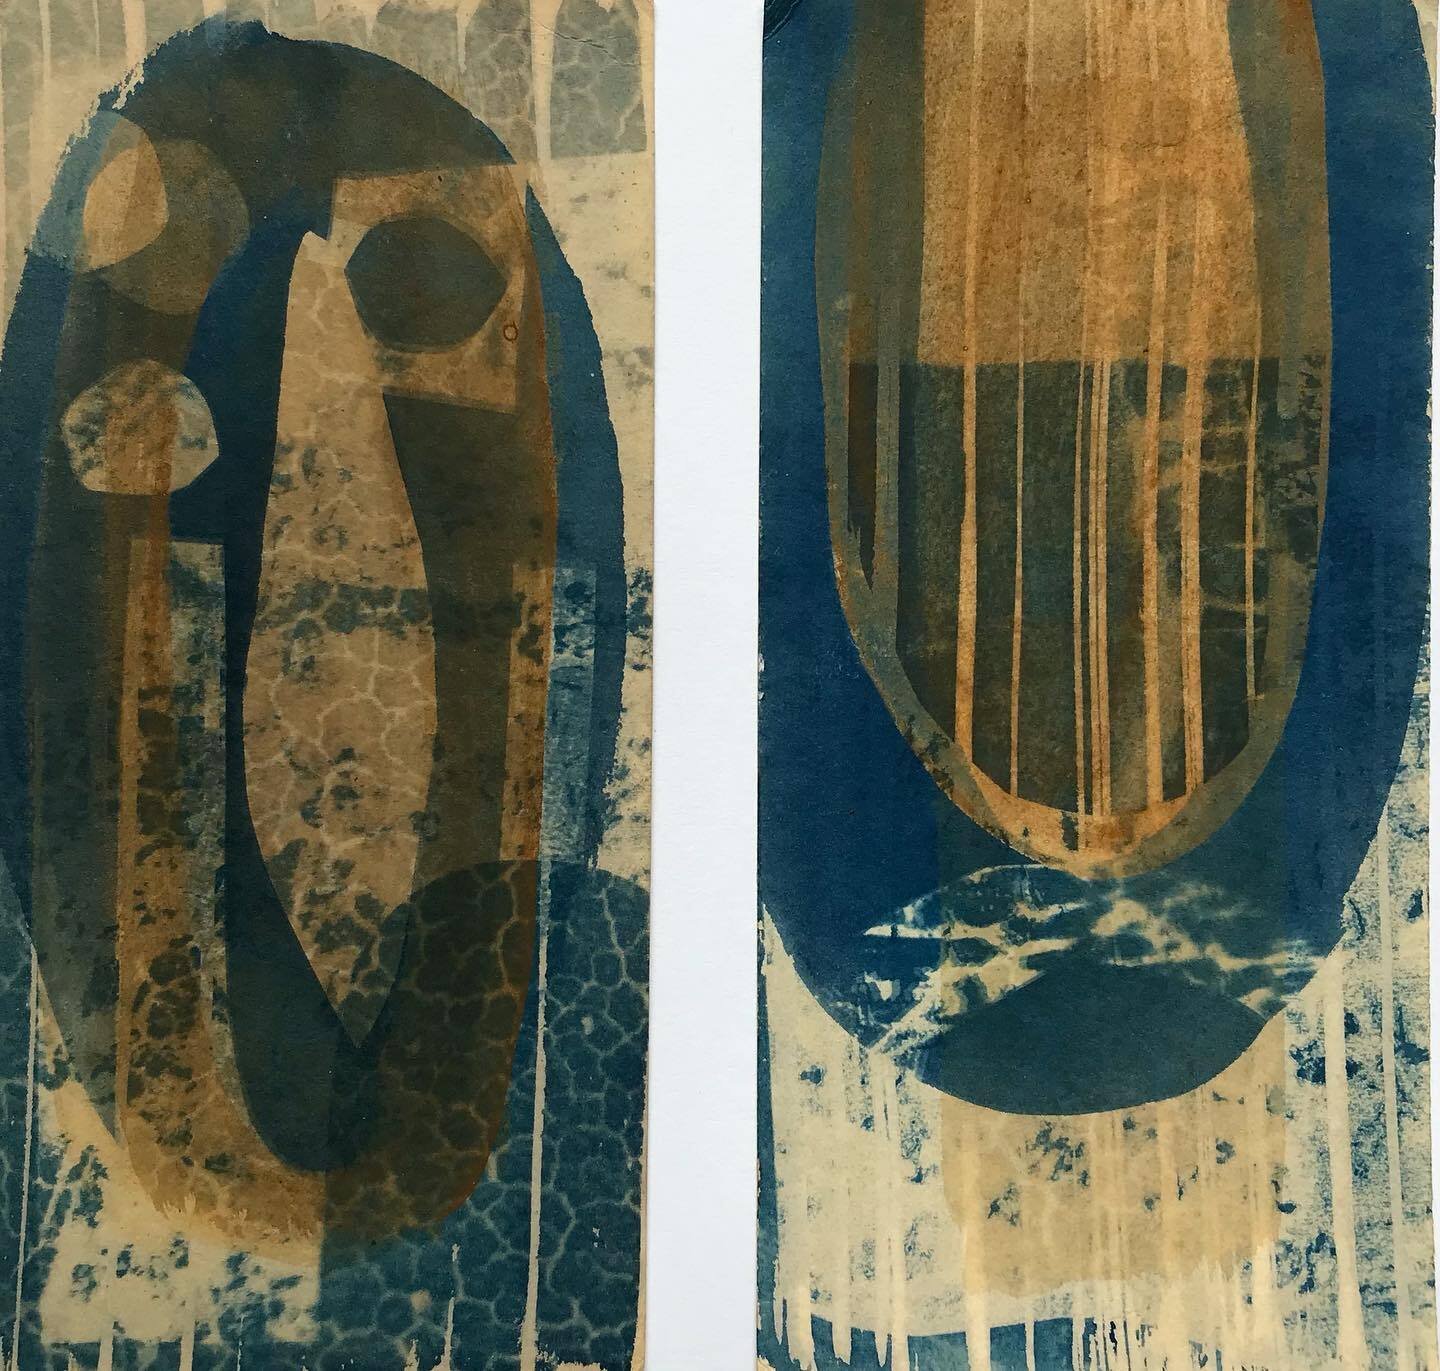 Cyanotype with natural paint pigment from ochres found along the Cowal Coastline.